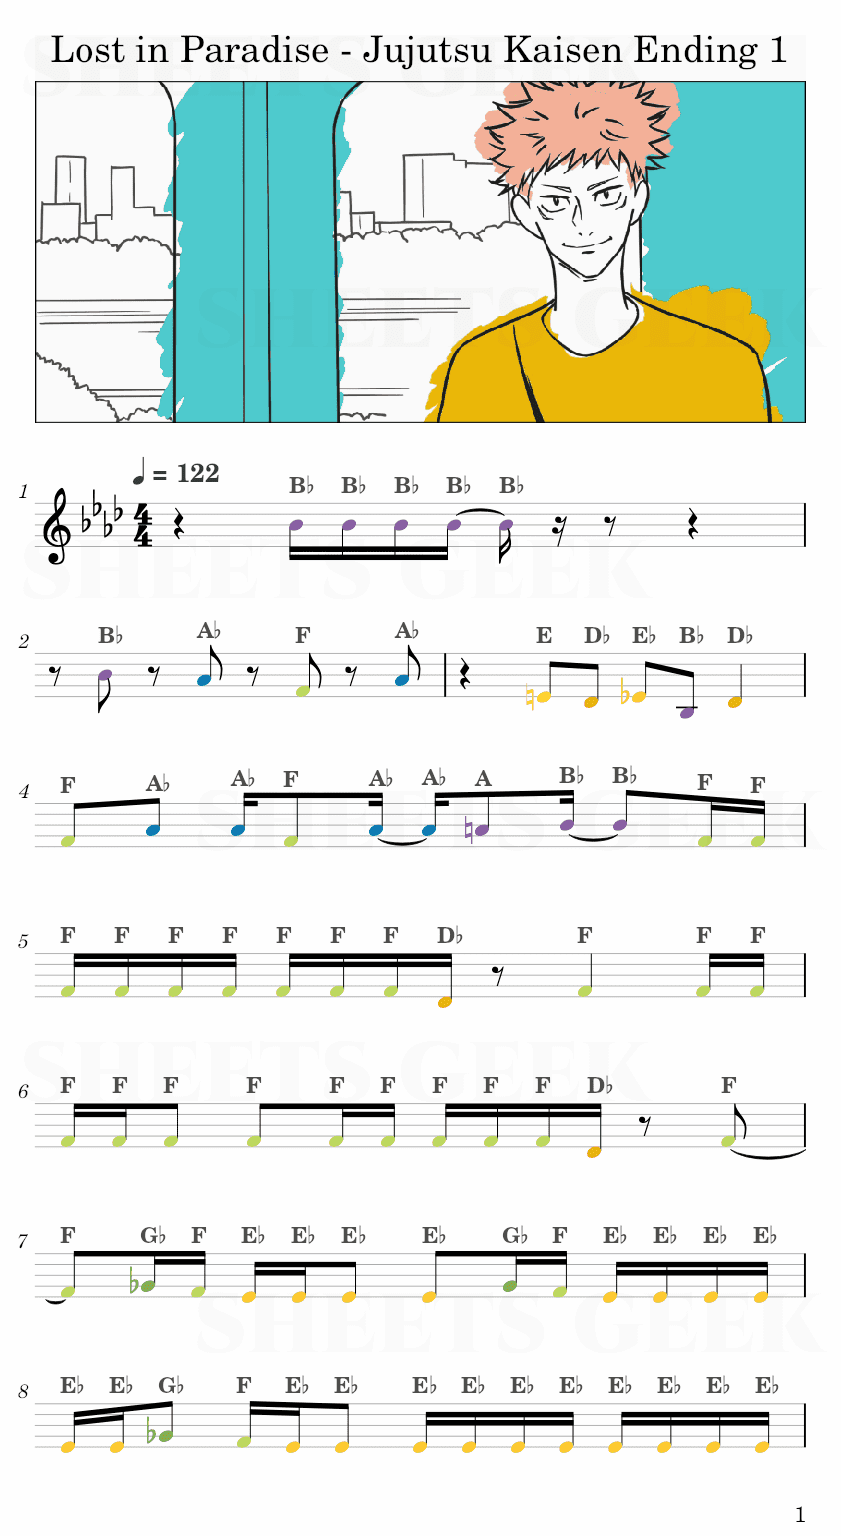 Lost in Paradise - Jujutsu Kaisen Ending 1 Easy Sheet Music Free for piano, keyboard, flute, violin, sax, cello page 1